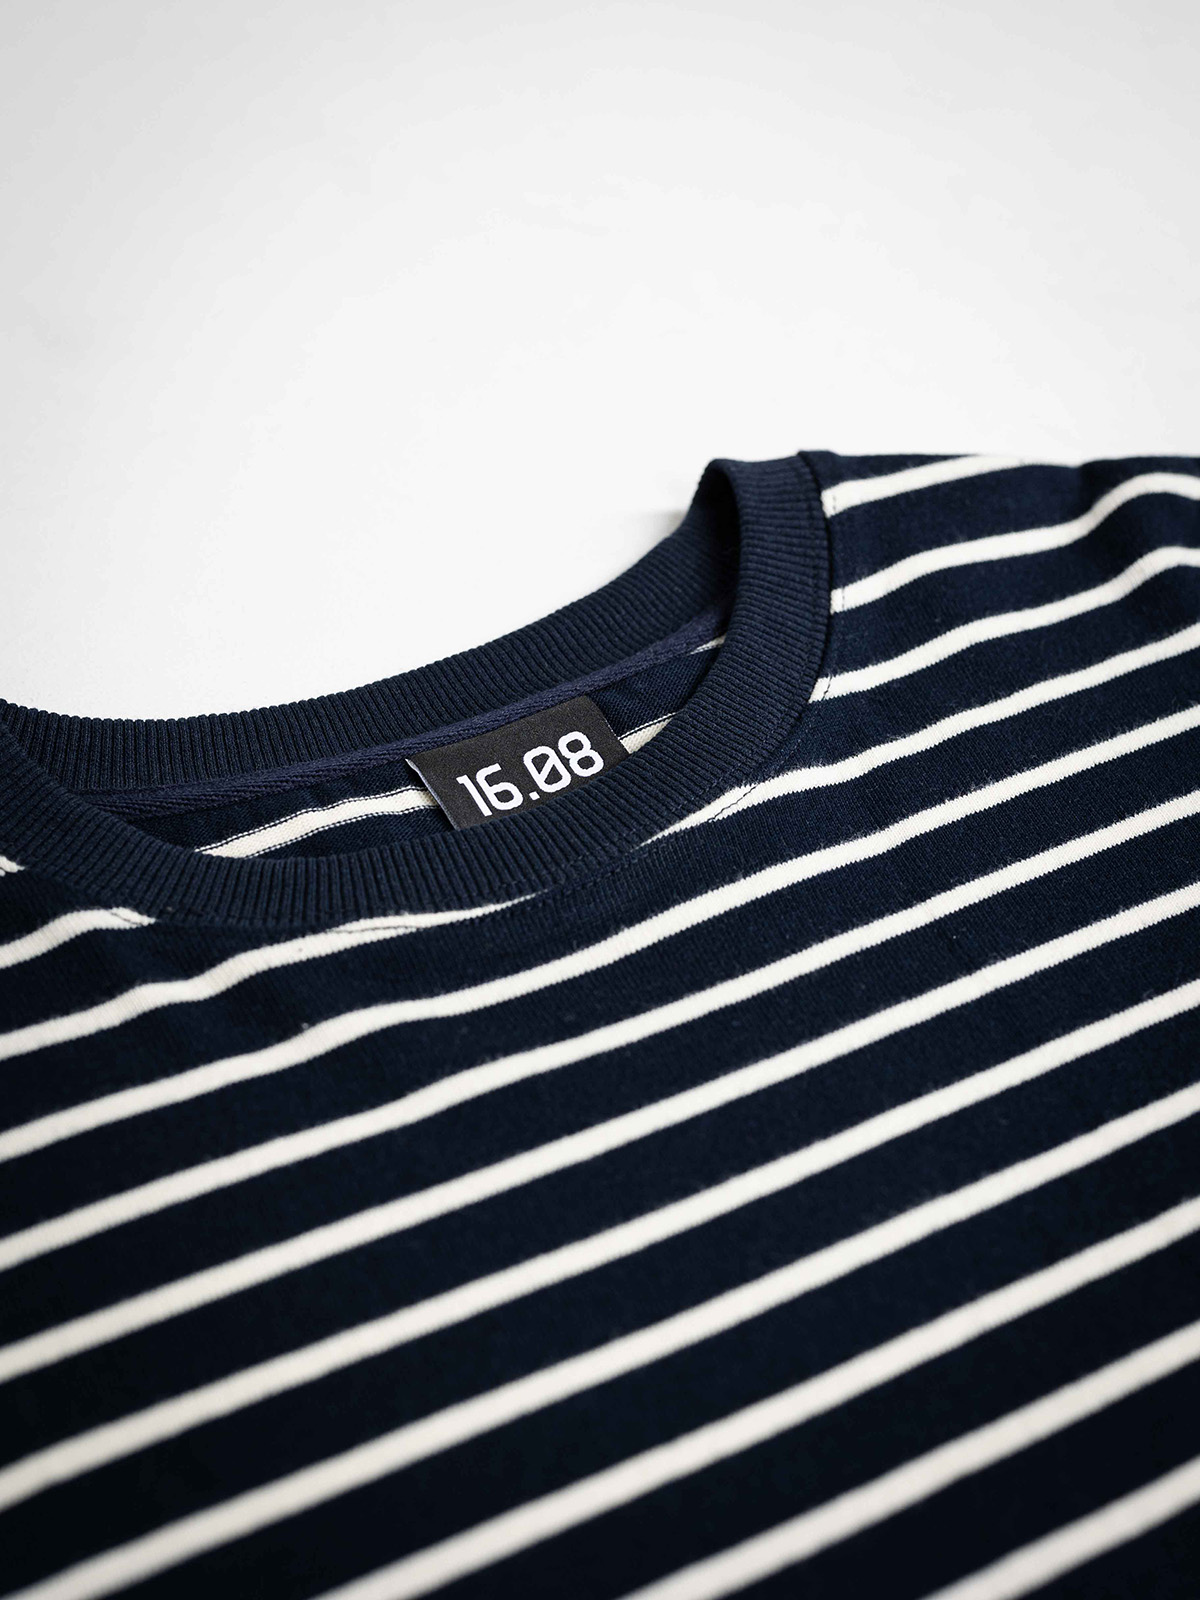 Navy Oversi… | 1608WEAR — Quality Menswear. Affordable prices.